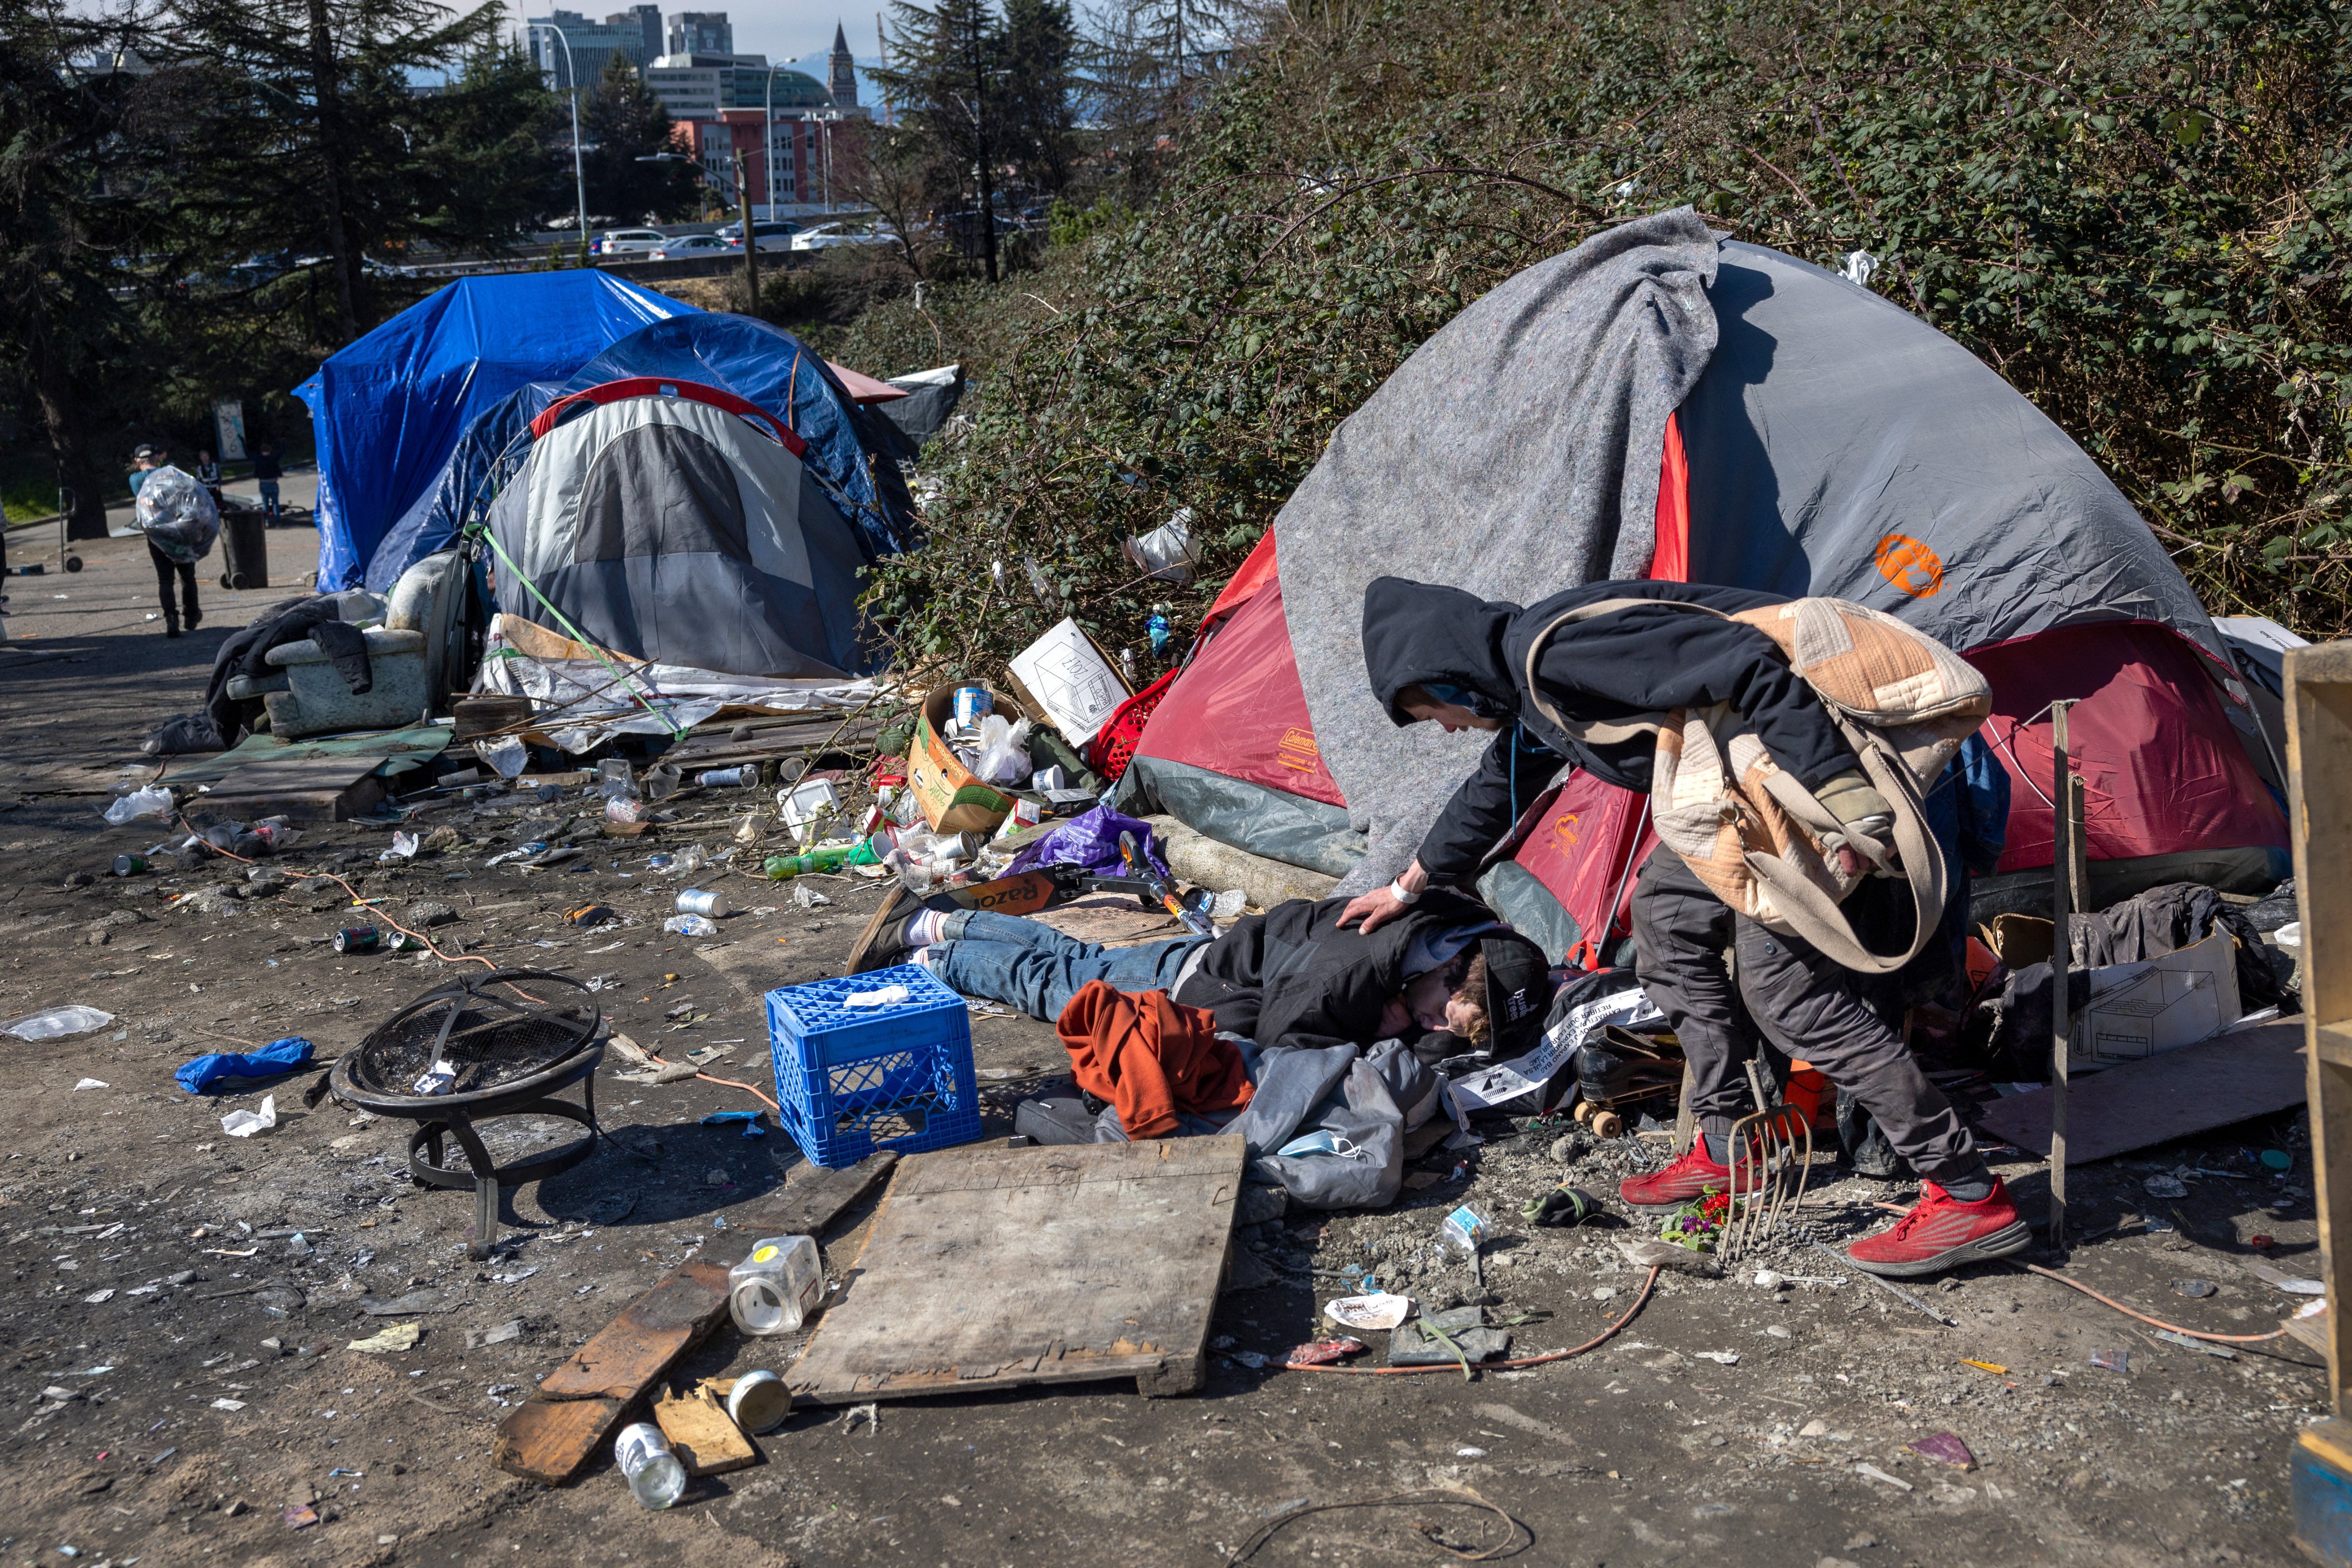 A homeless man checks on a friend who passed out after smoking fentanyl at a homeless encampment in Seattle, Washington, on March 12, 2022. Photo: AFP